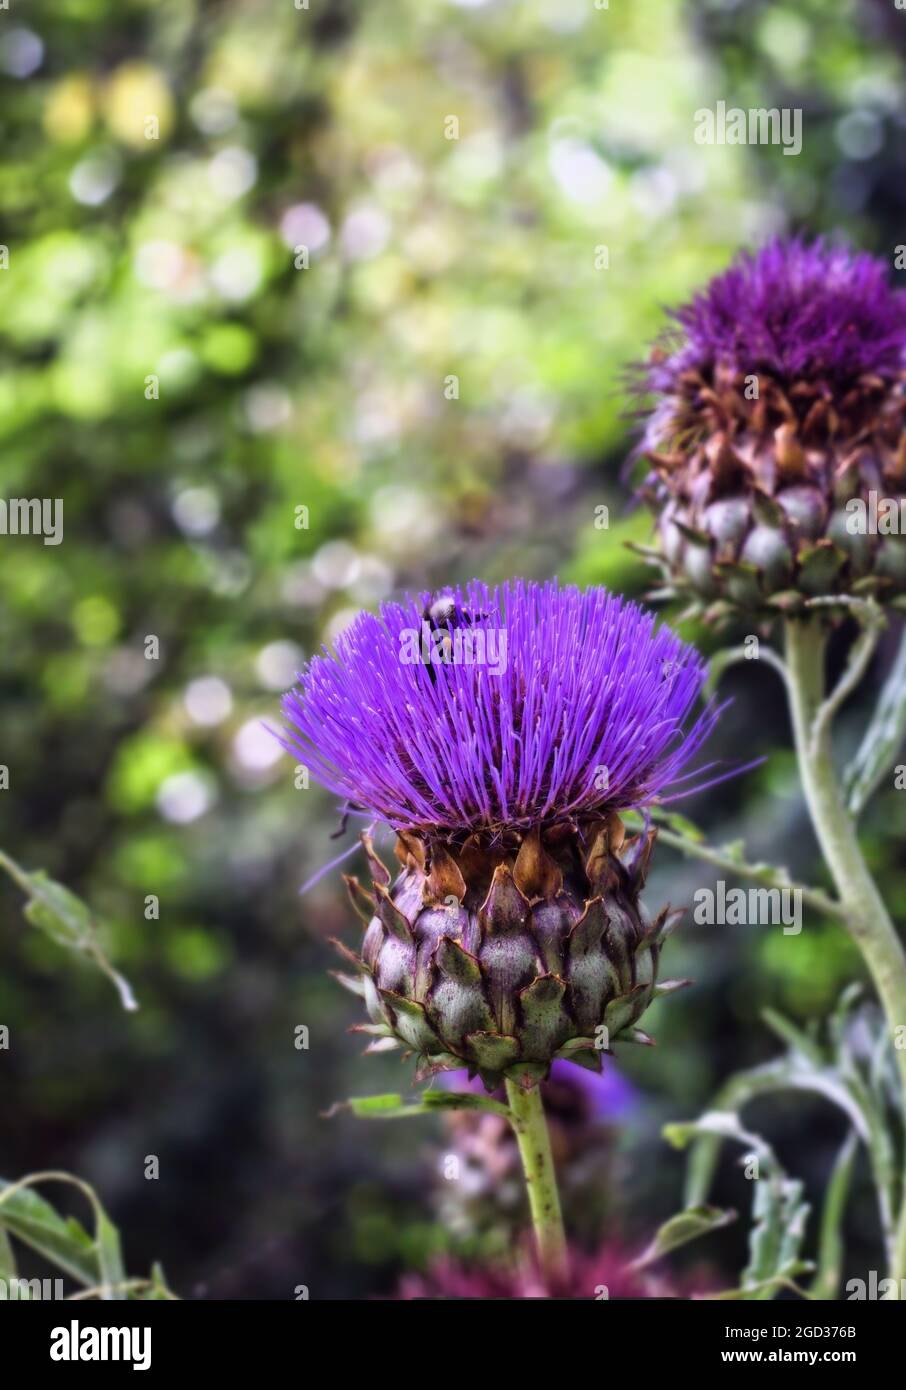 Purple artichoke tangle of Cynara cardunculus scolymus, star pointed bracts, swirl against blurred background Stock Photo